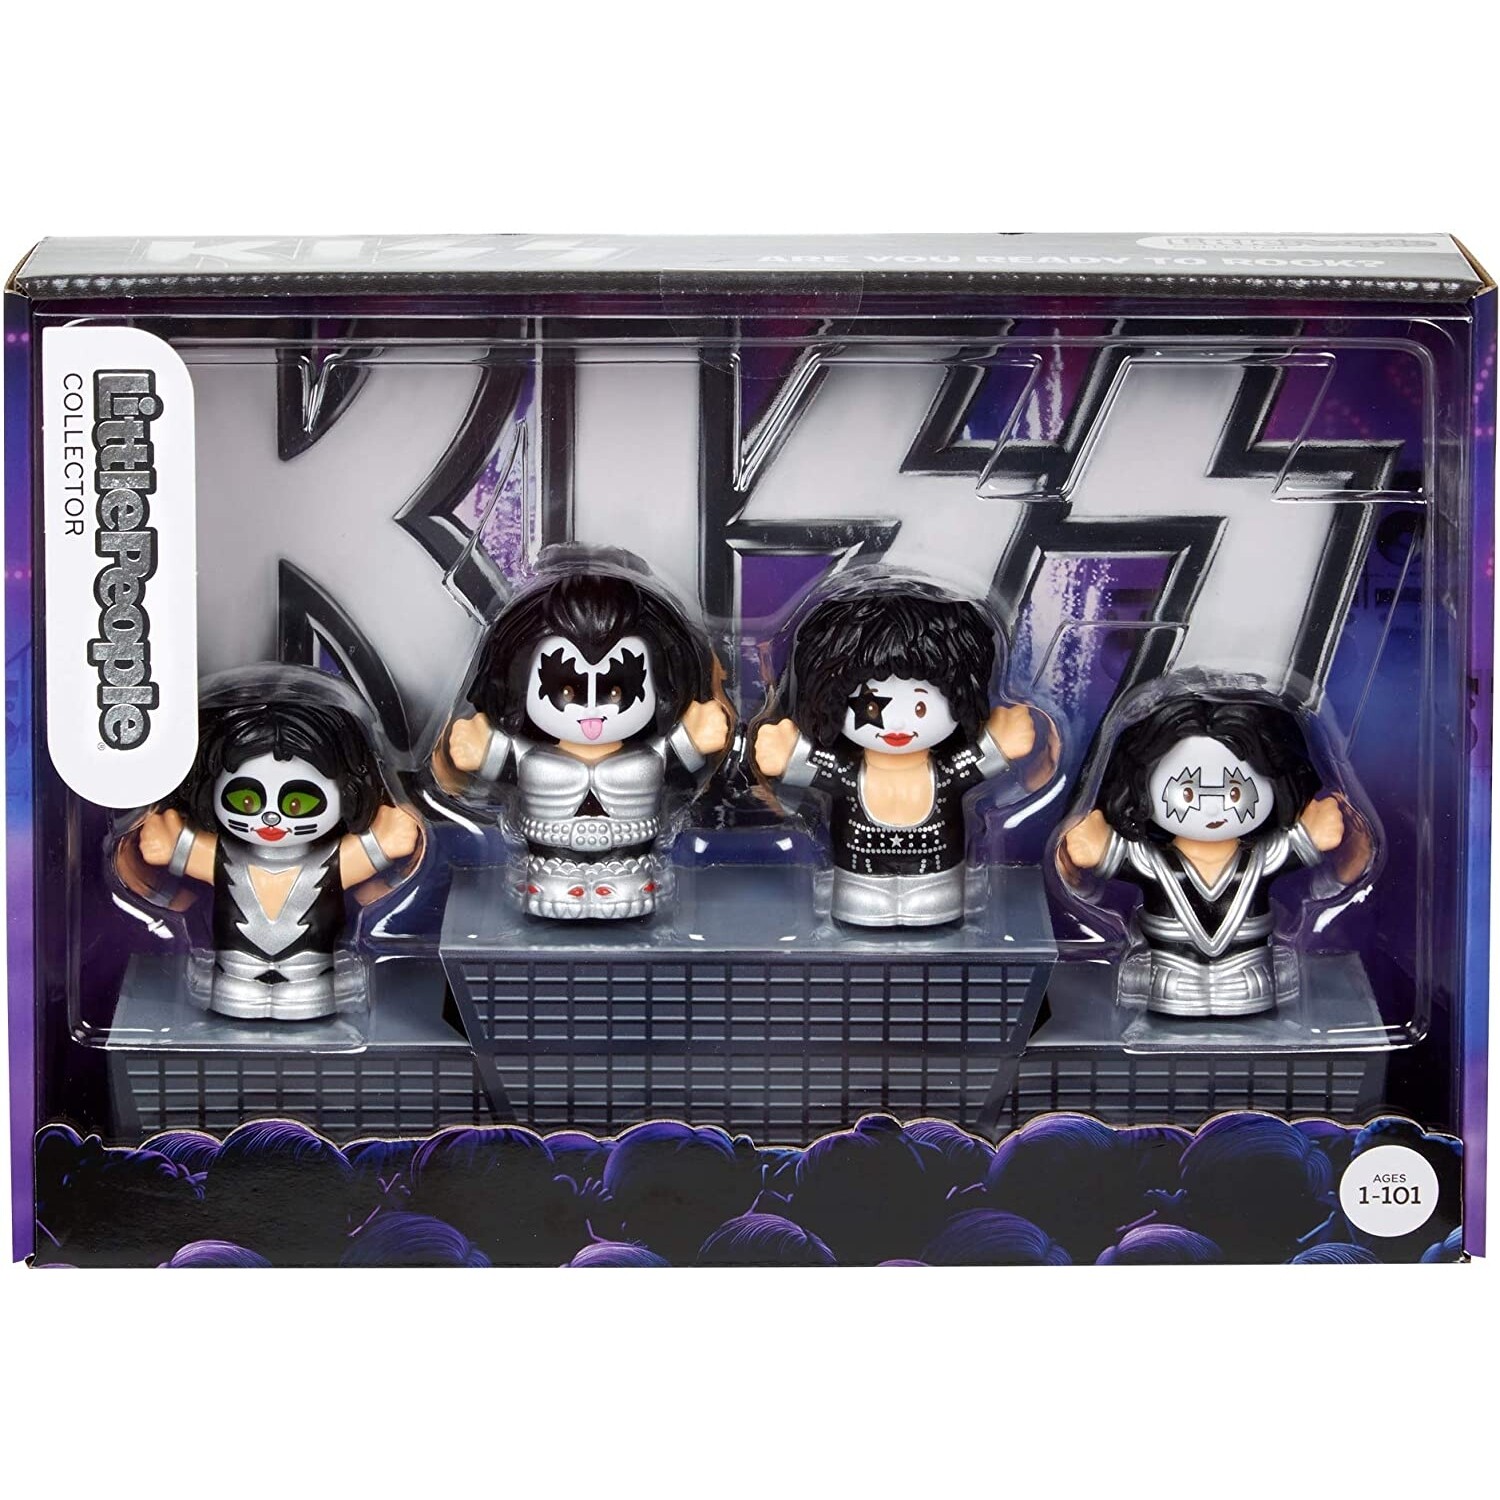 KISS Little People Set of 4 from Fisher Price